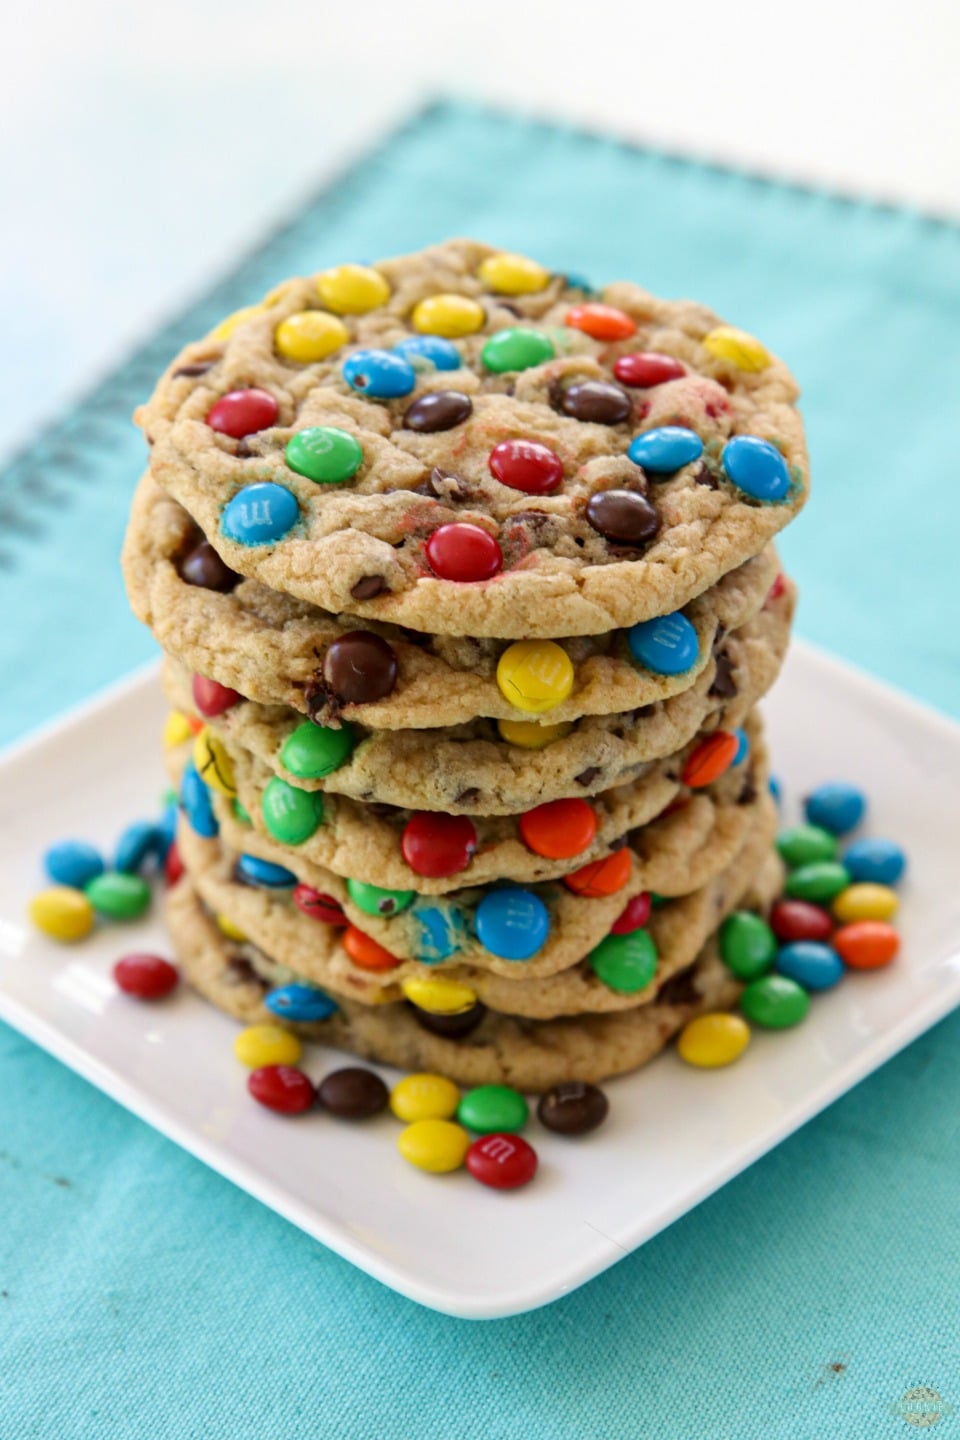 Soft & Chewy M&M Cookies made with butter, sugars, pudding mix & M&M's candy! Easy tip for coating your cookies PERFECTLY with M&M's! BEST M&M Cookie recipe ever! 